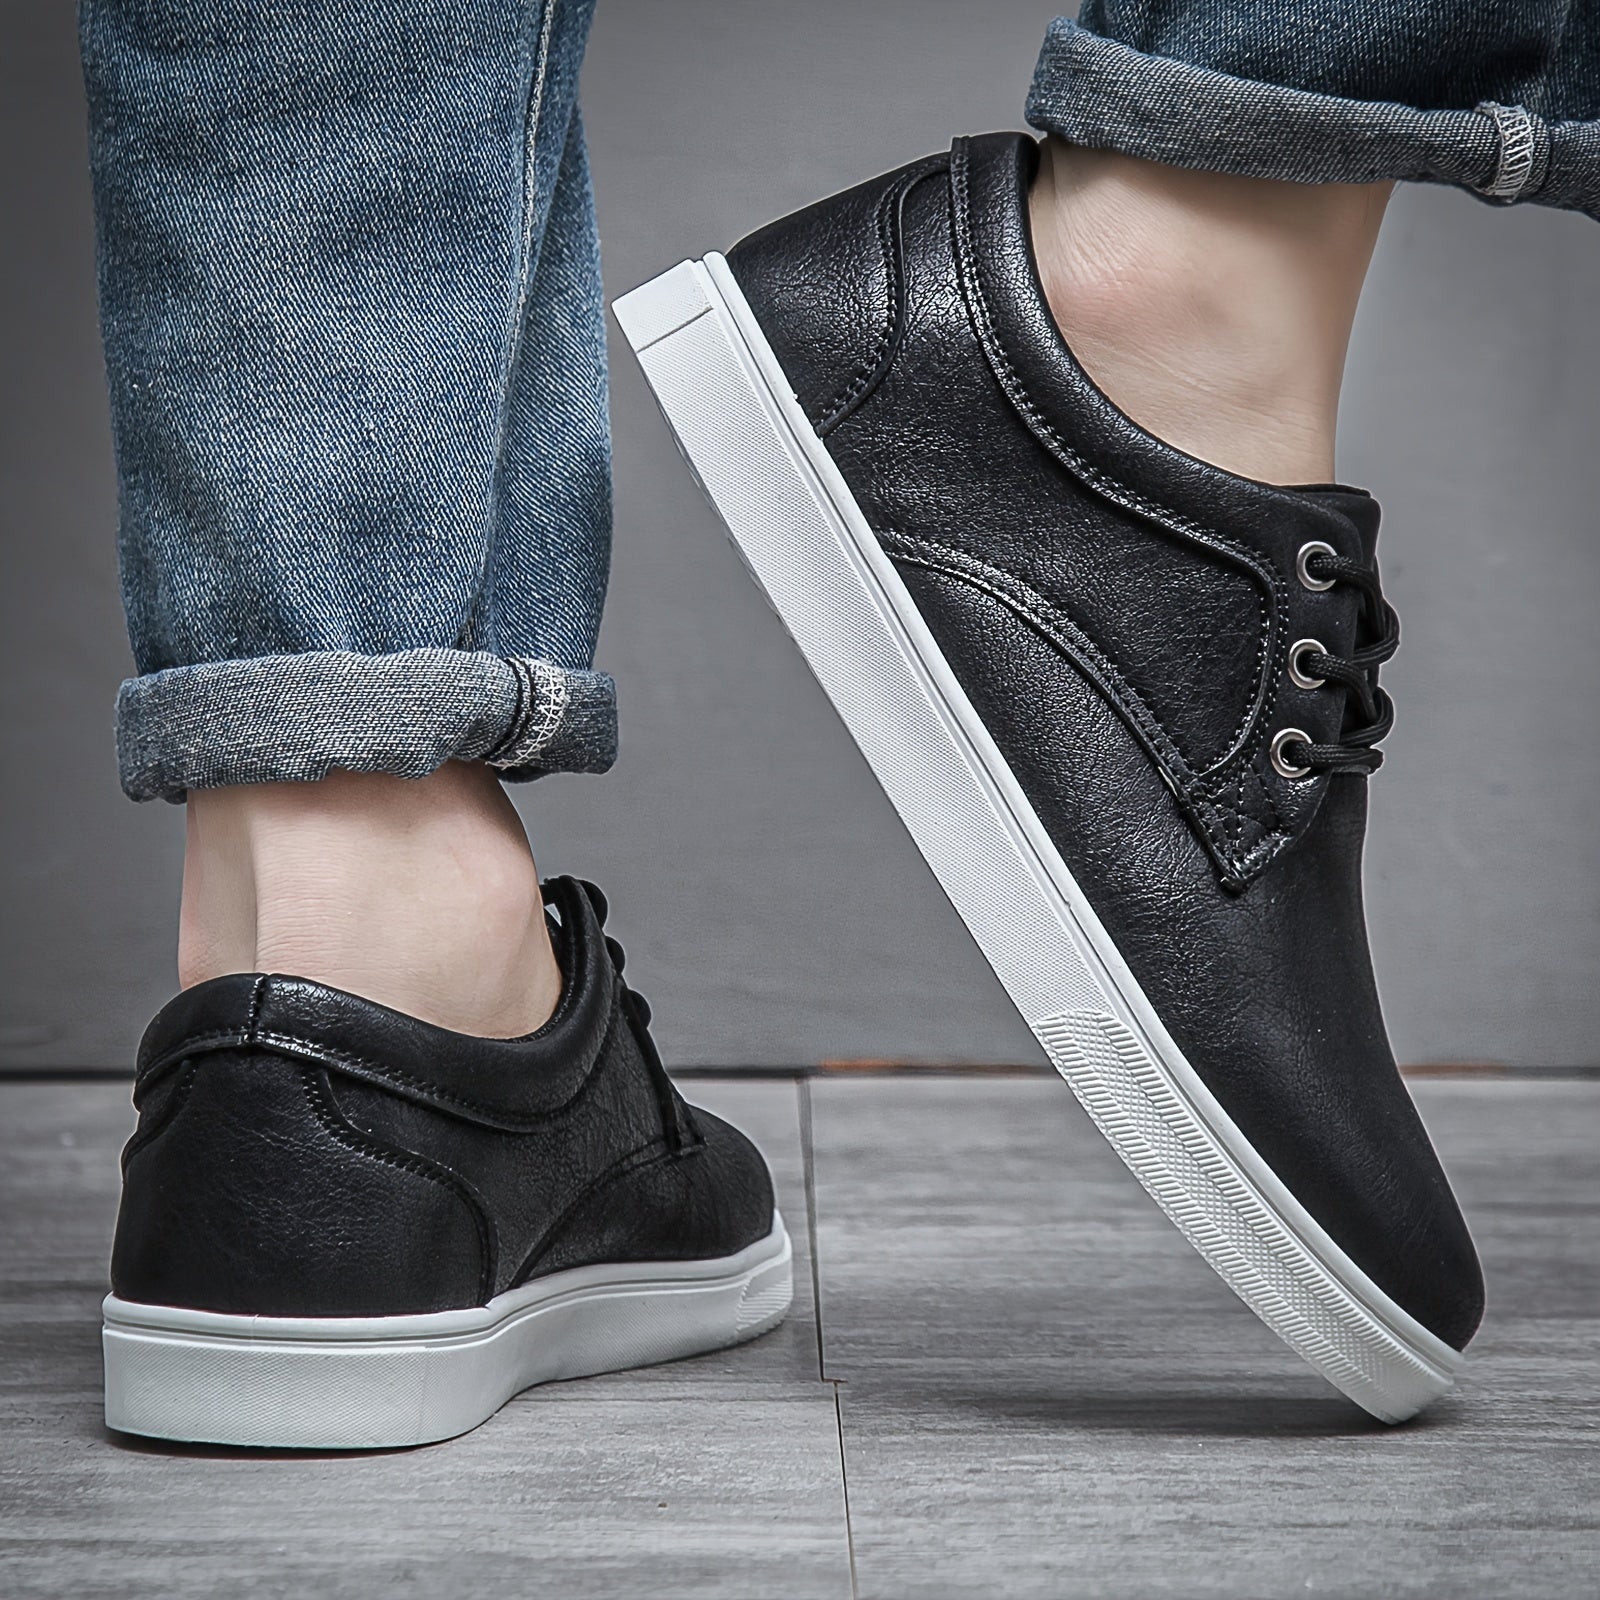 Modern Men's Skate-Inspired Shoes: Durable PU Leather, Breathable Design, Enhanced Traction - Men's Shoes-CasualFlowshop 